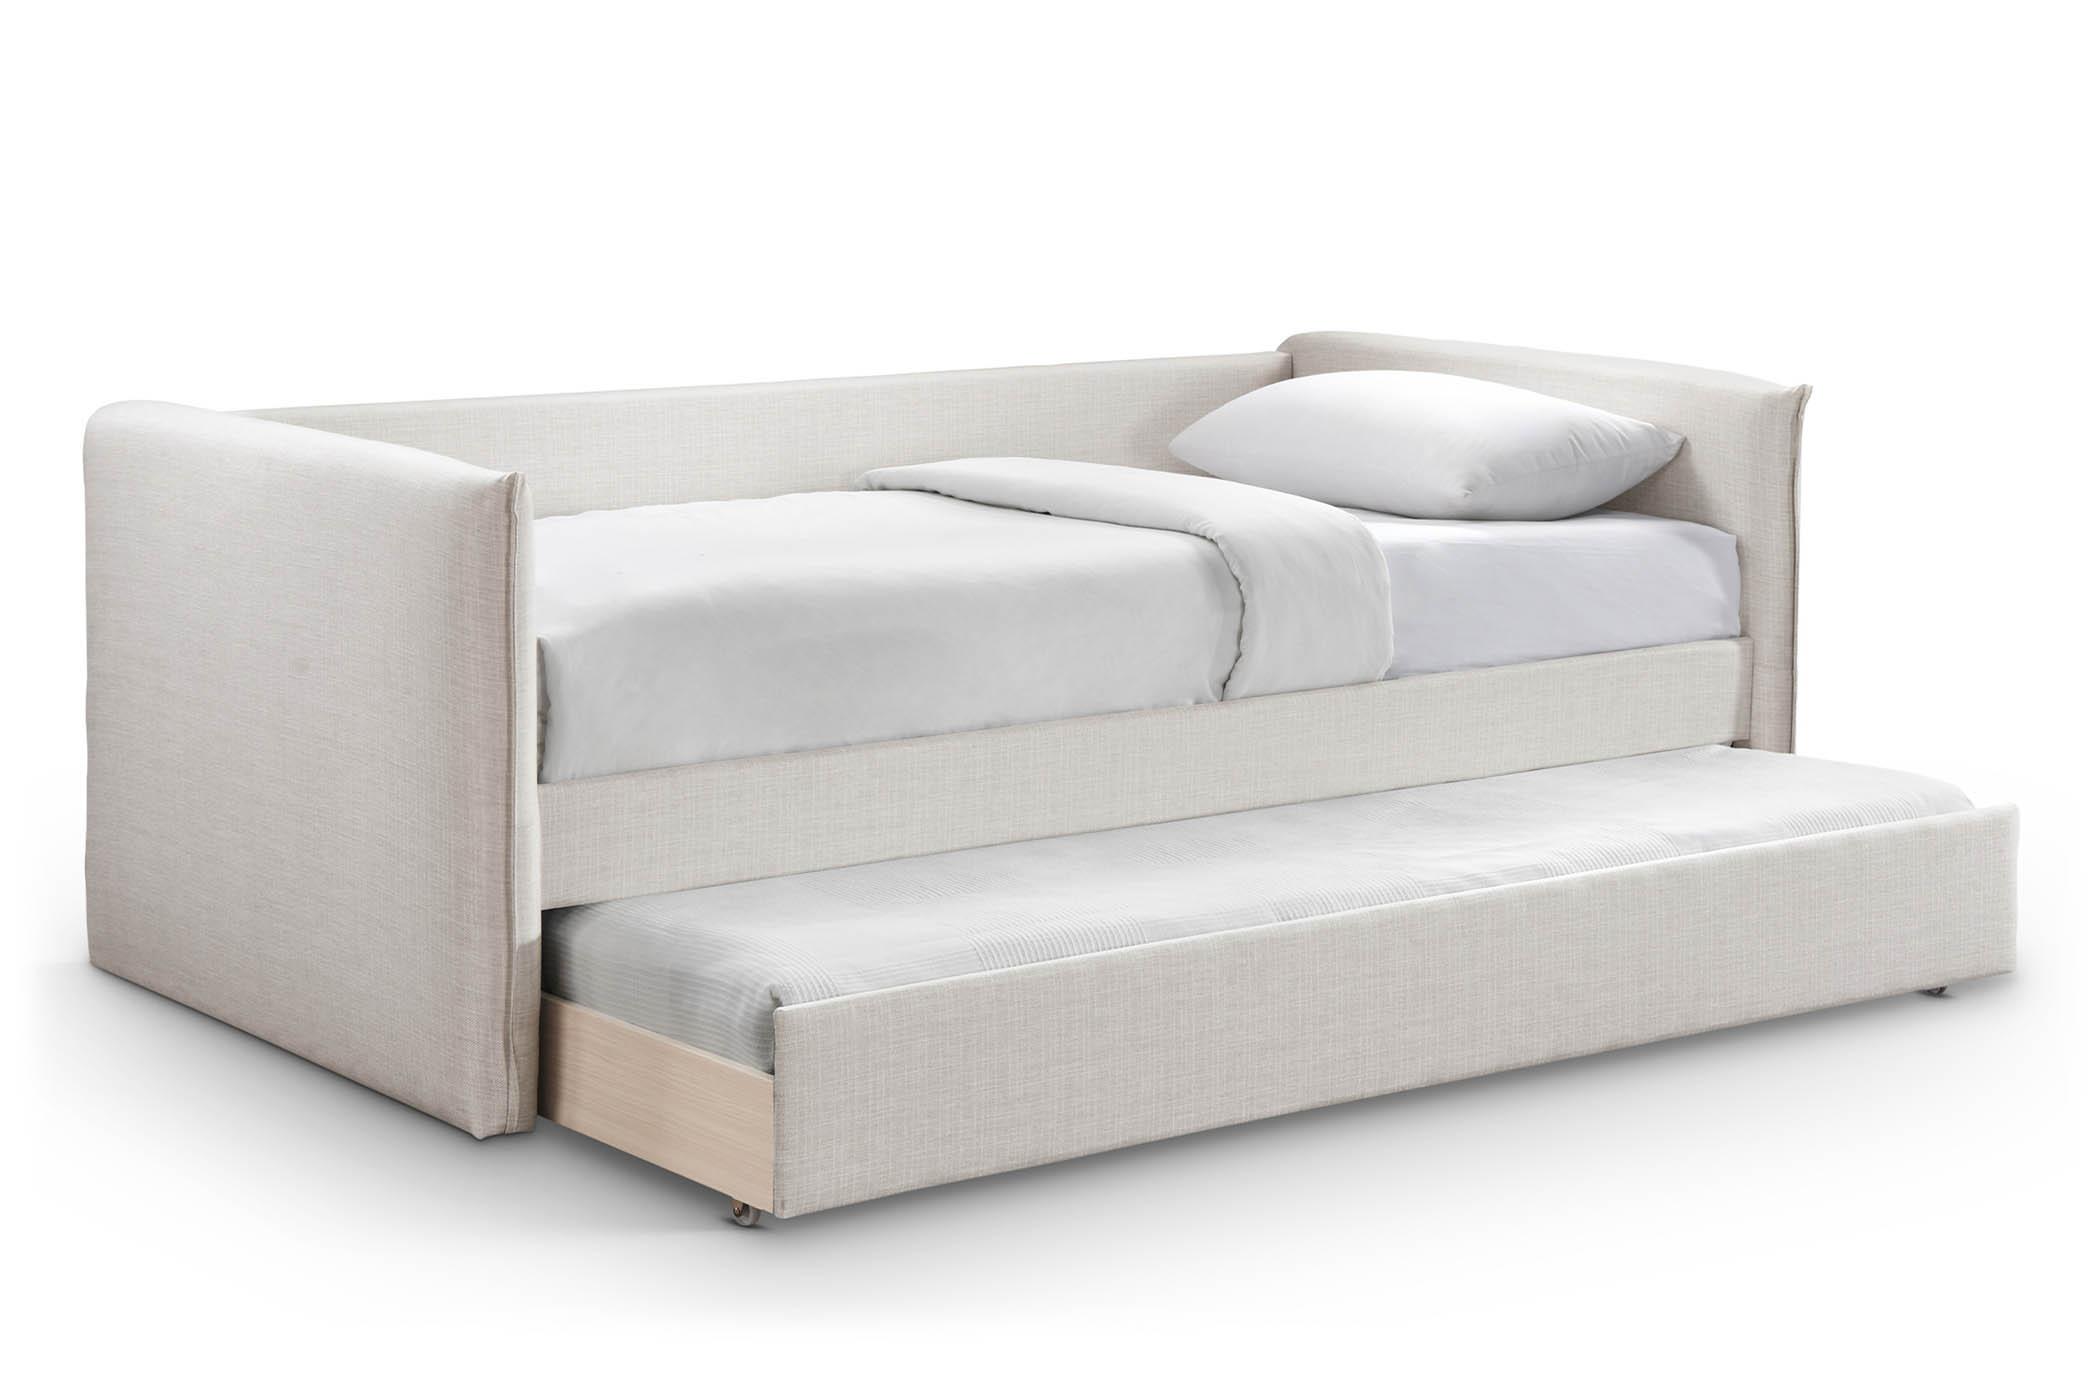 Meridian Furniture ColtonCream-T Daybed